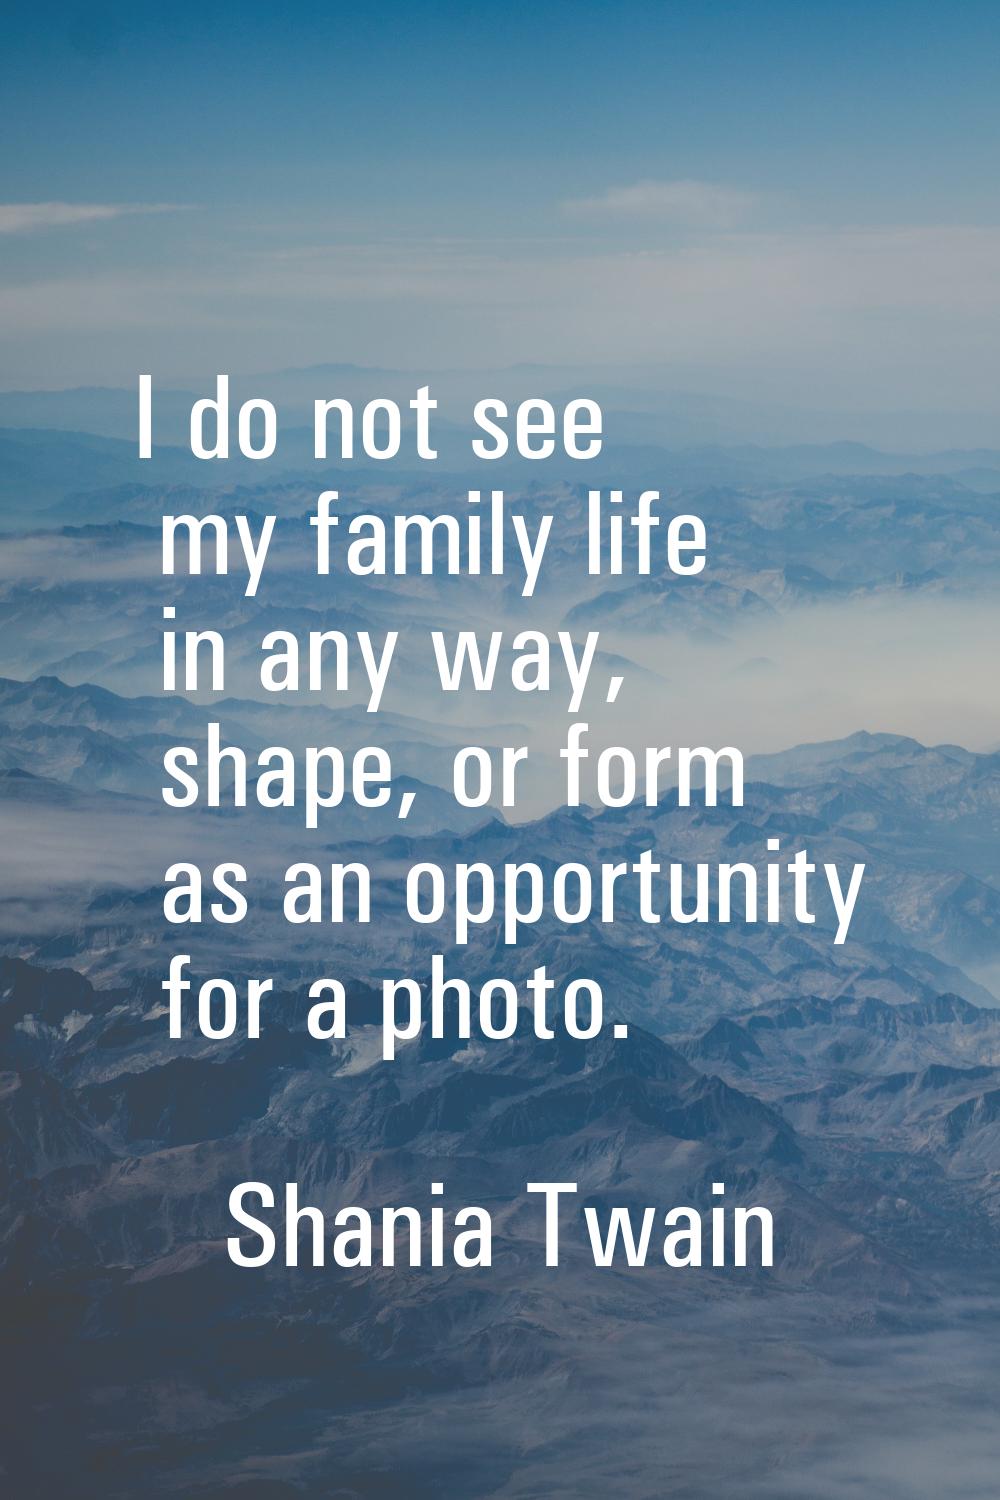 I do not see my family life in any way, shape, or form as an opportunity for a photo.